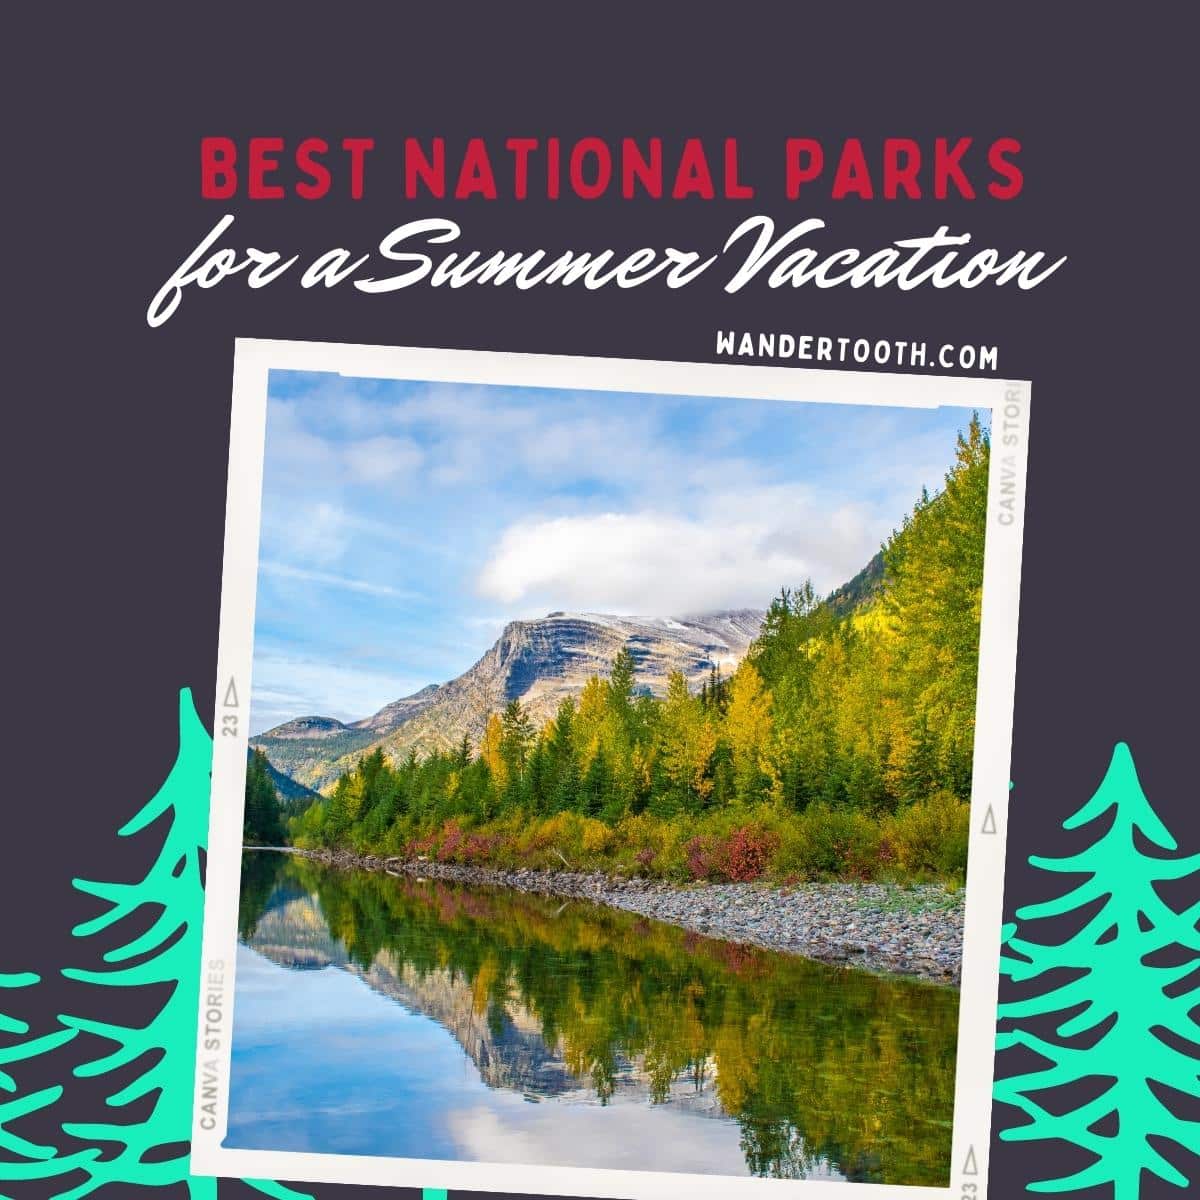 Best National Parks For a Summer Vacation - Wandertooth Travel